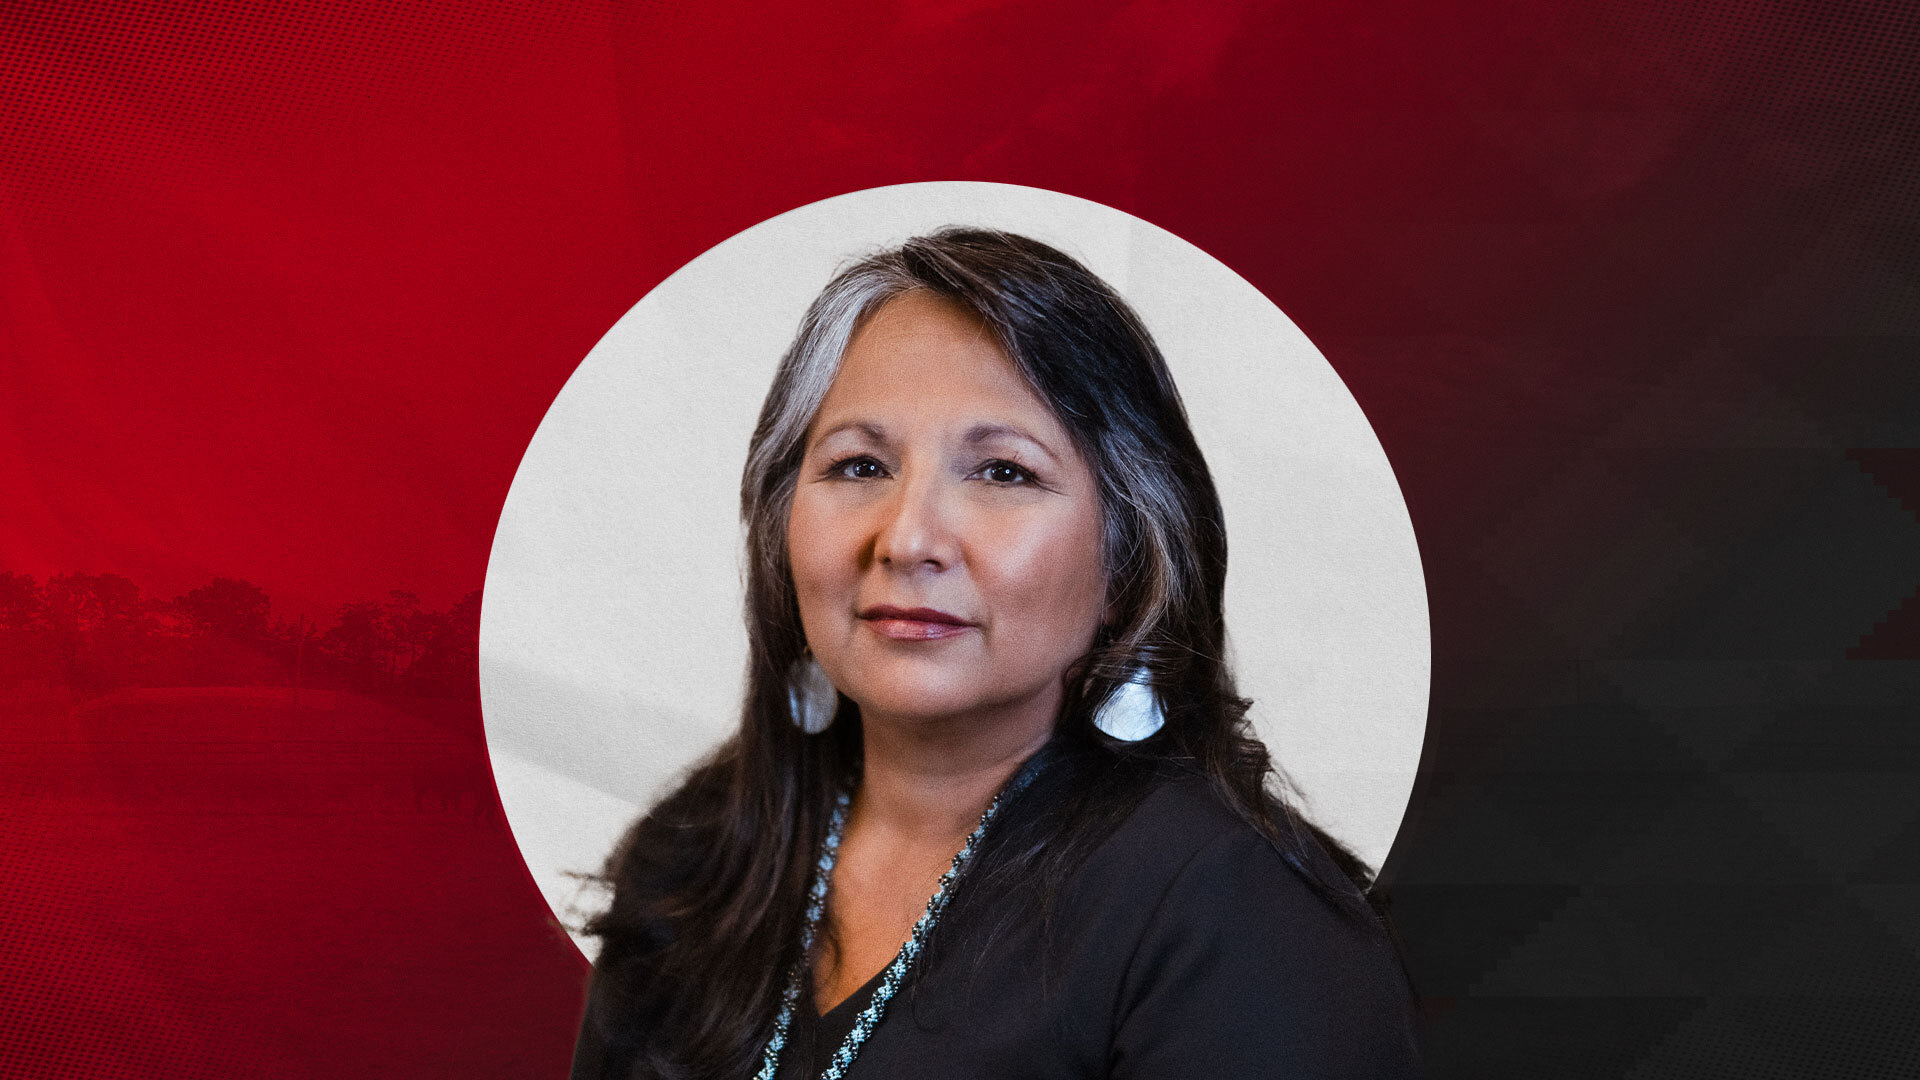 Gaby Strong Announced as New NDN Collective Vice President